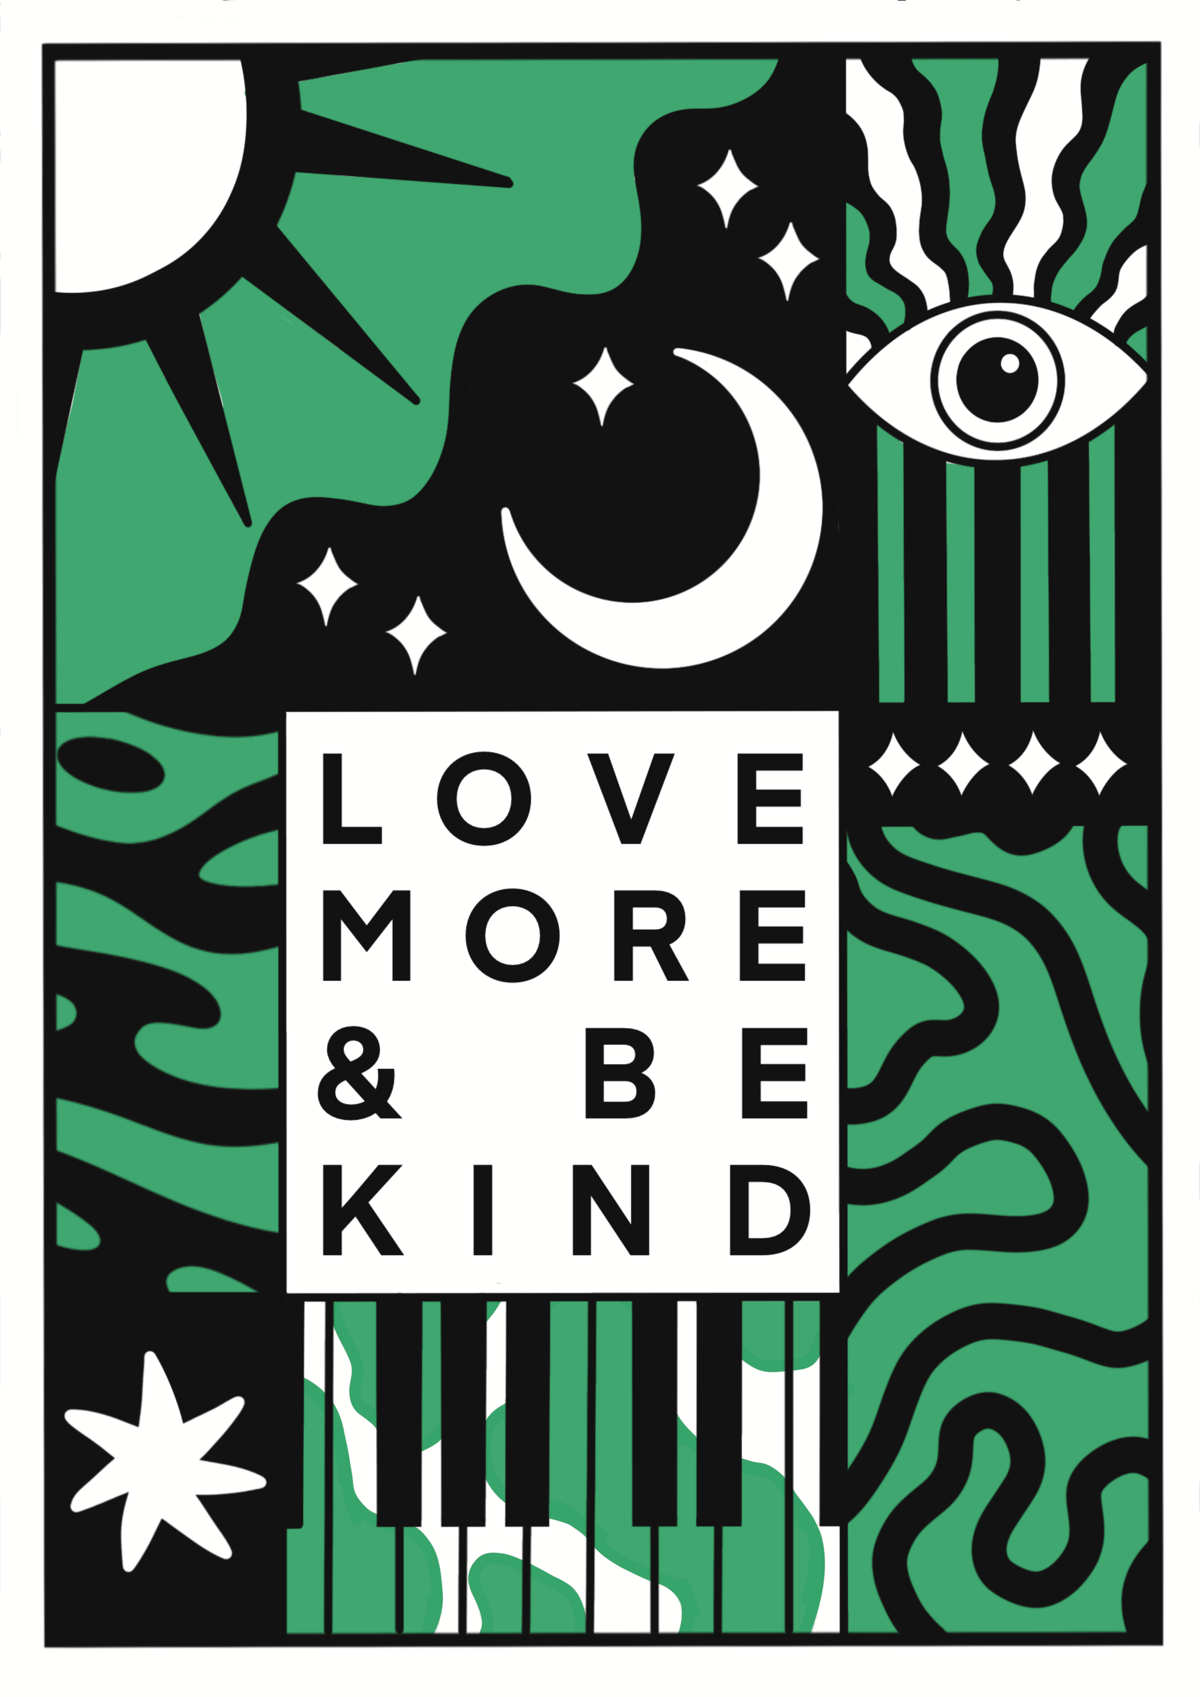 Image of Love more & be kind print